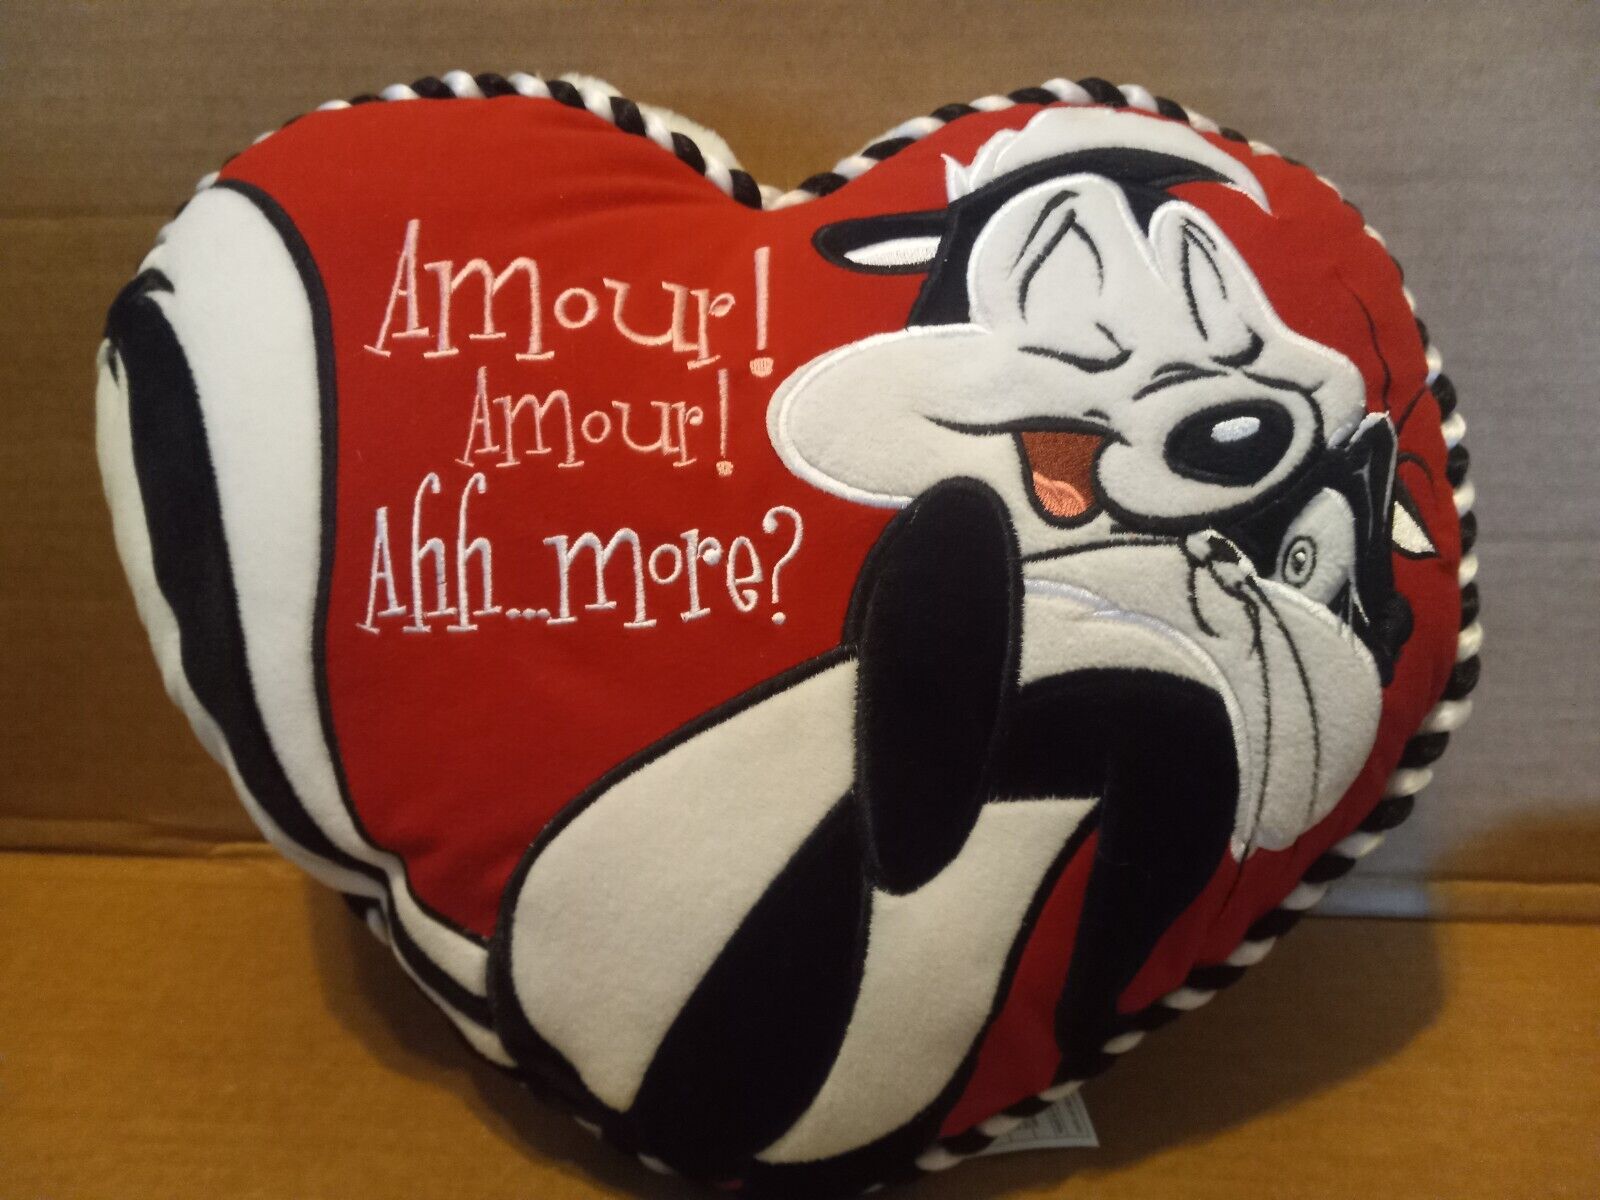 Looney Tunes Pepe Le Pew Pillow Warner Bros Heart Shape Amour Amour Ahh...More?